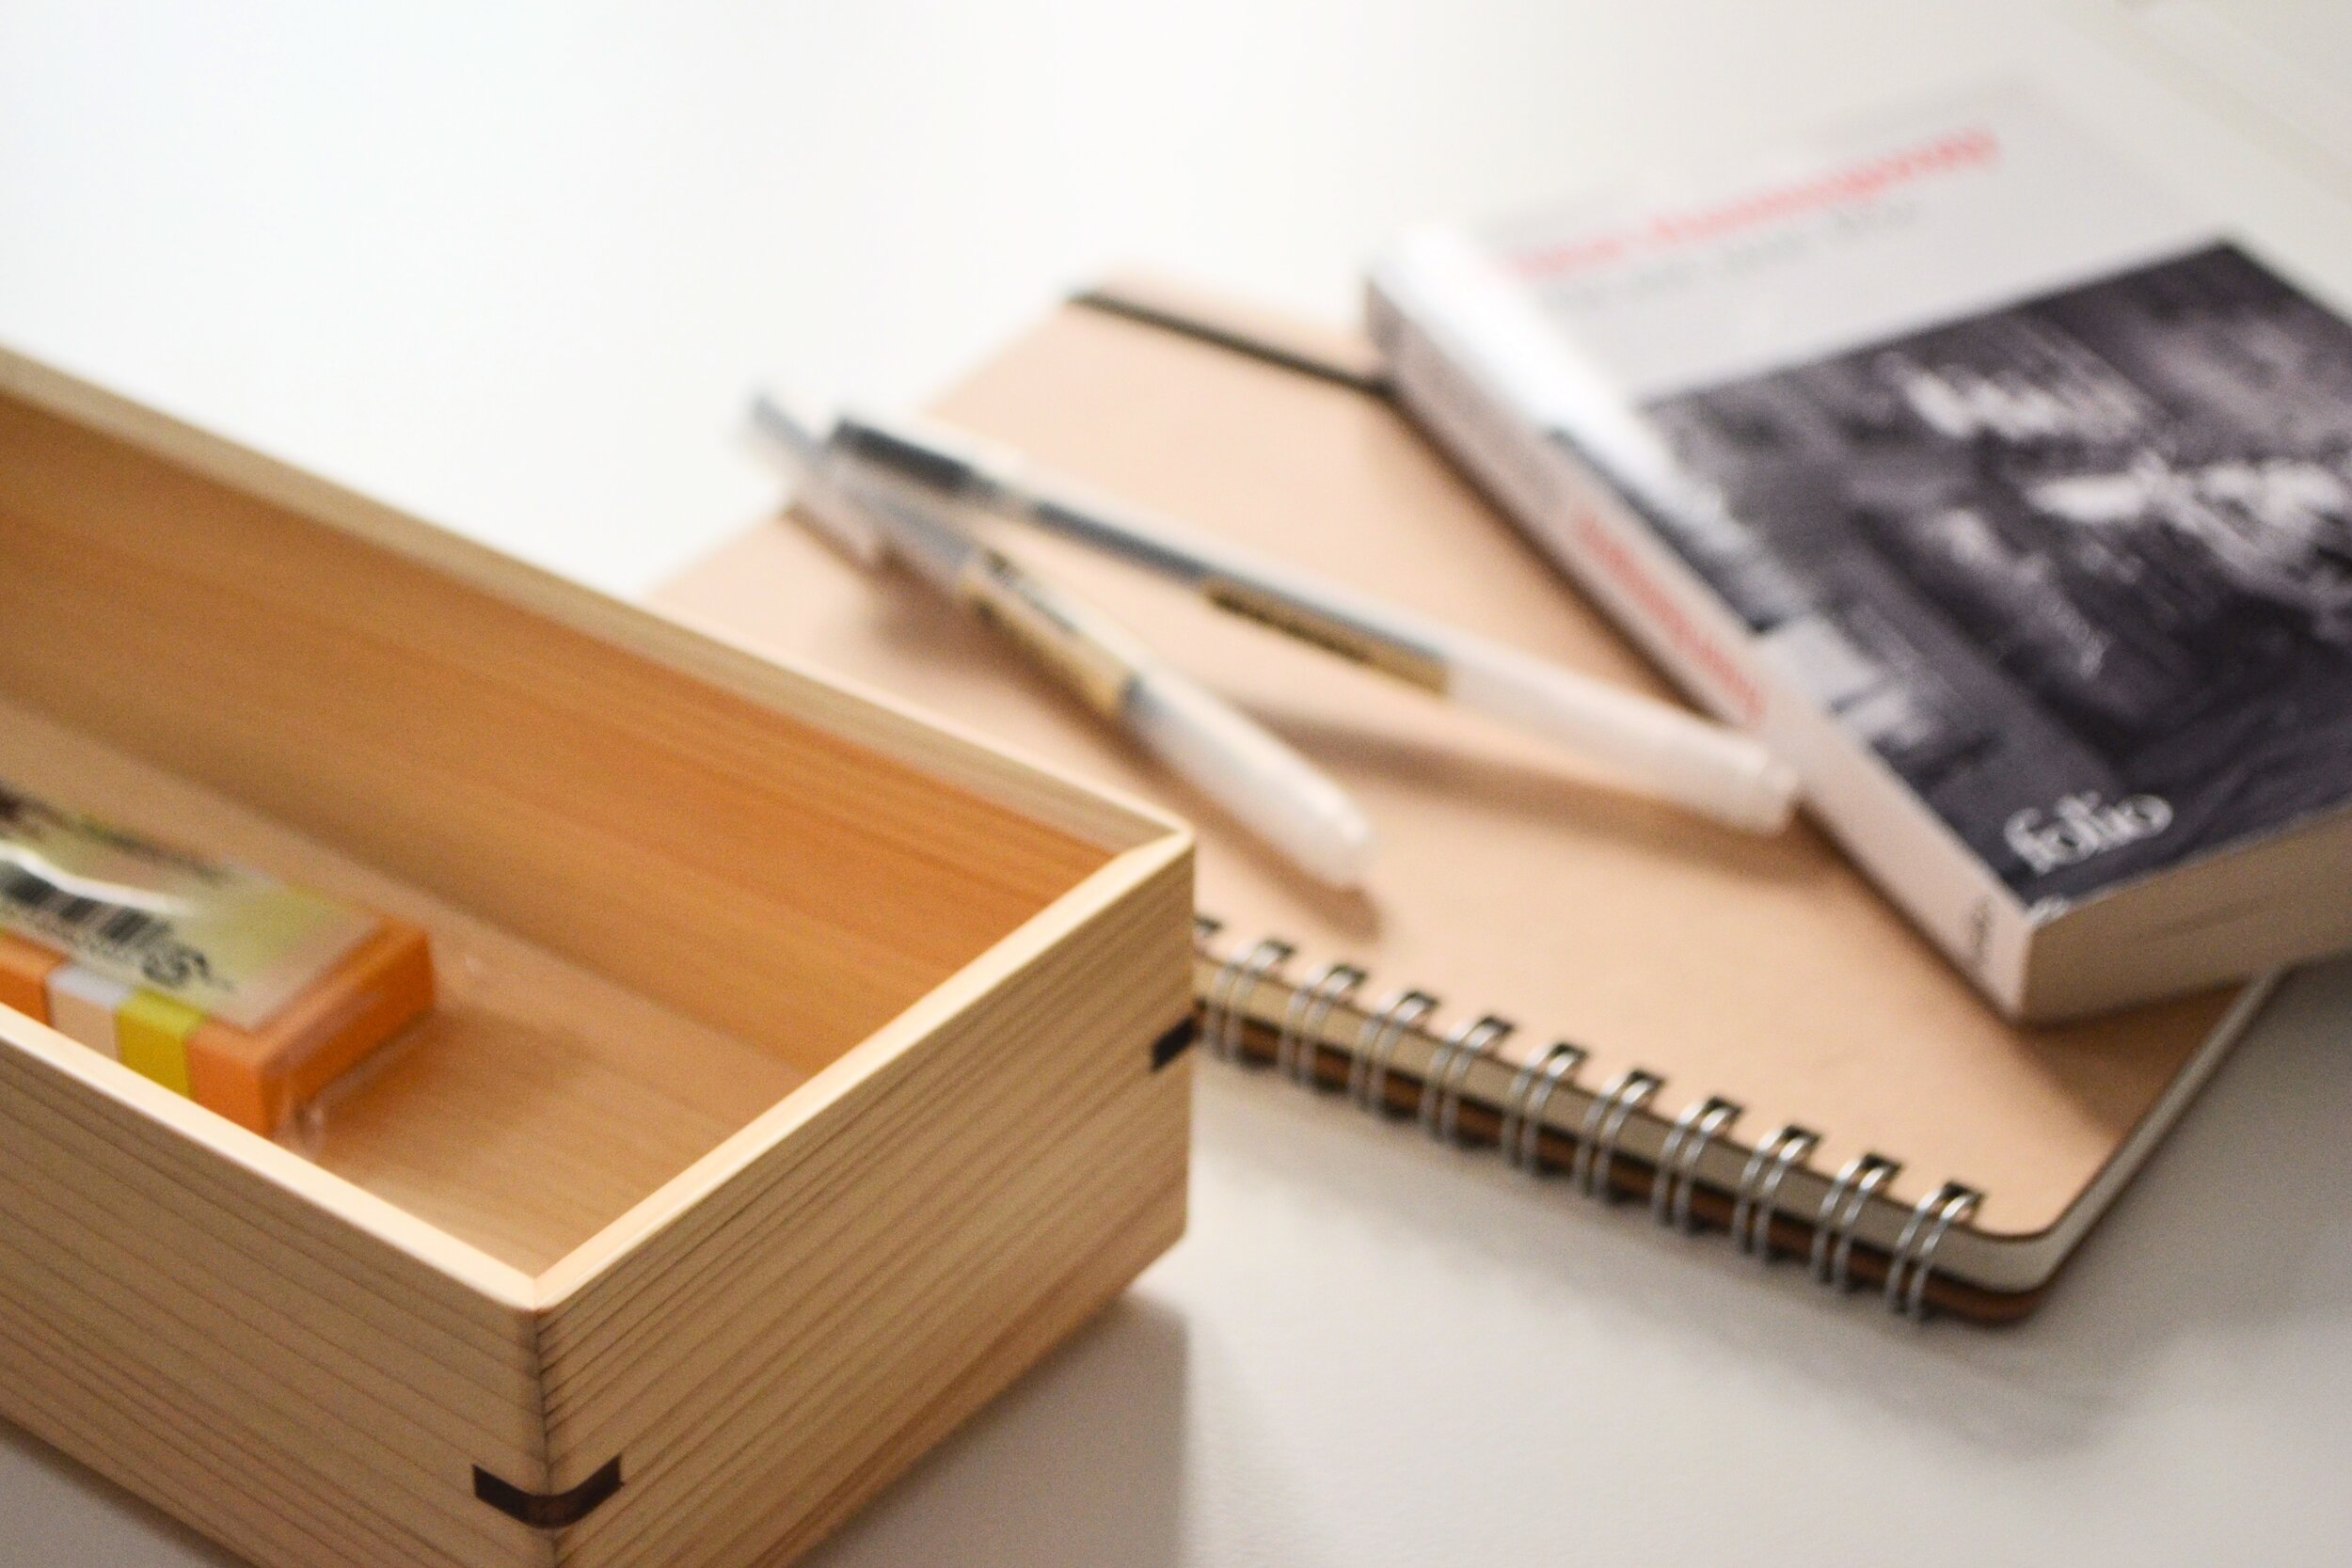 Hako collection - hinoki boxes crafted by Toyooka Craft &amp; designed by Flavien Delbergue for Atelier Takumi